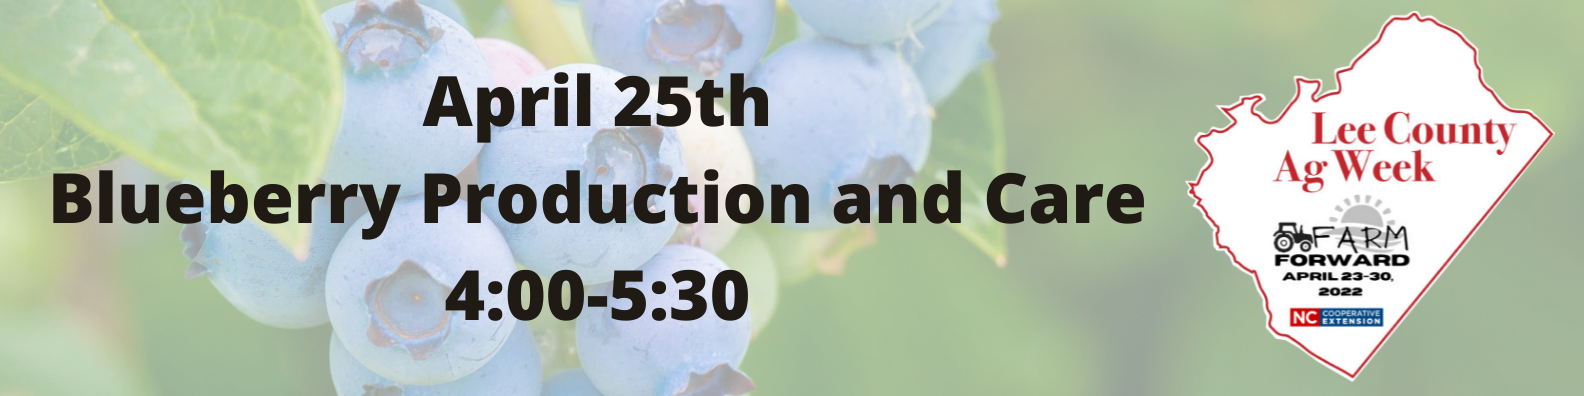 blueberry production and care april 25